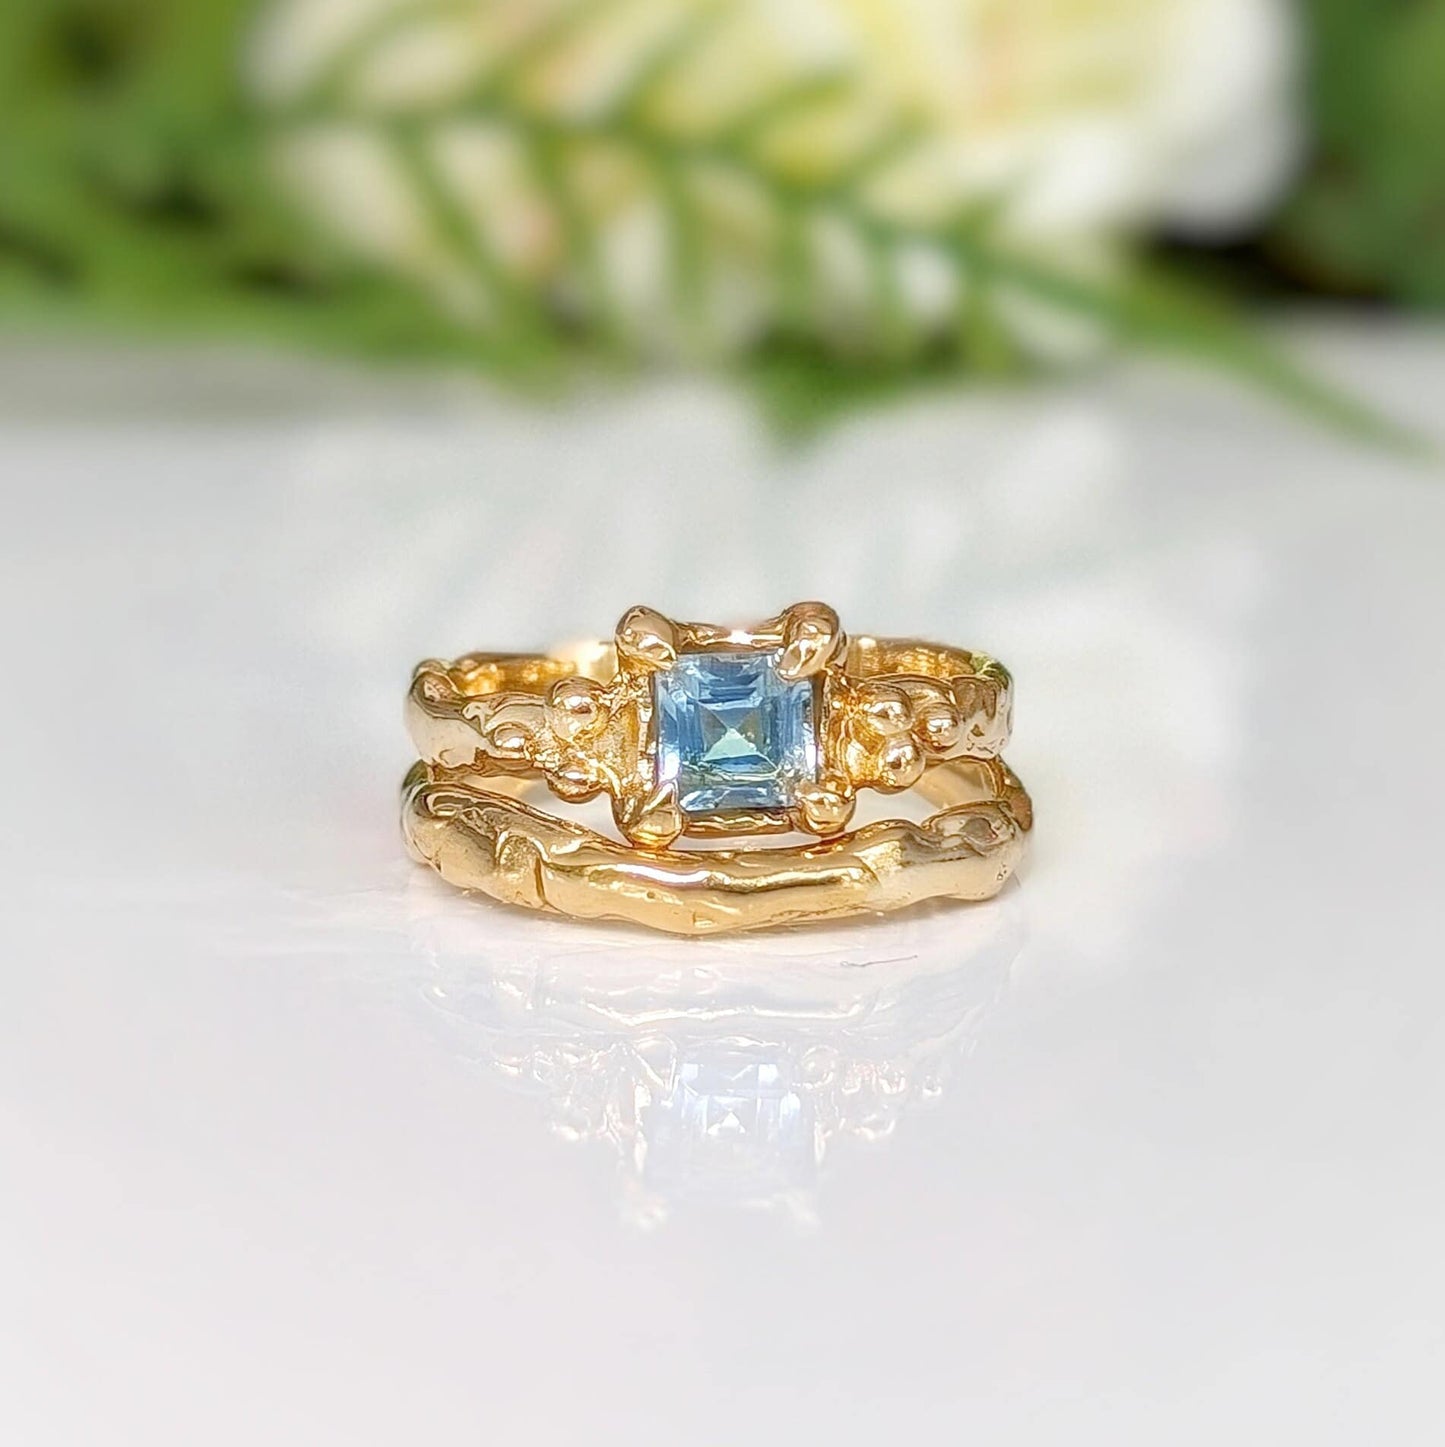 Set of wedding bands - Square Blue Topaz engagement ring and simple textured Molten Solid 14k Gold wedding band